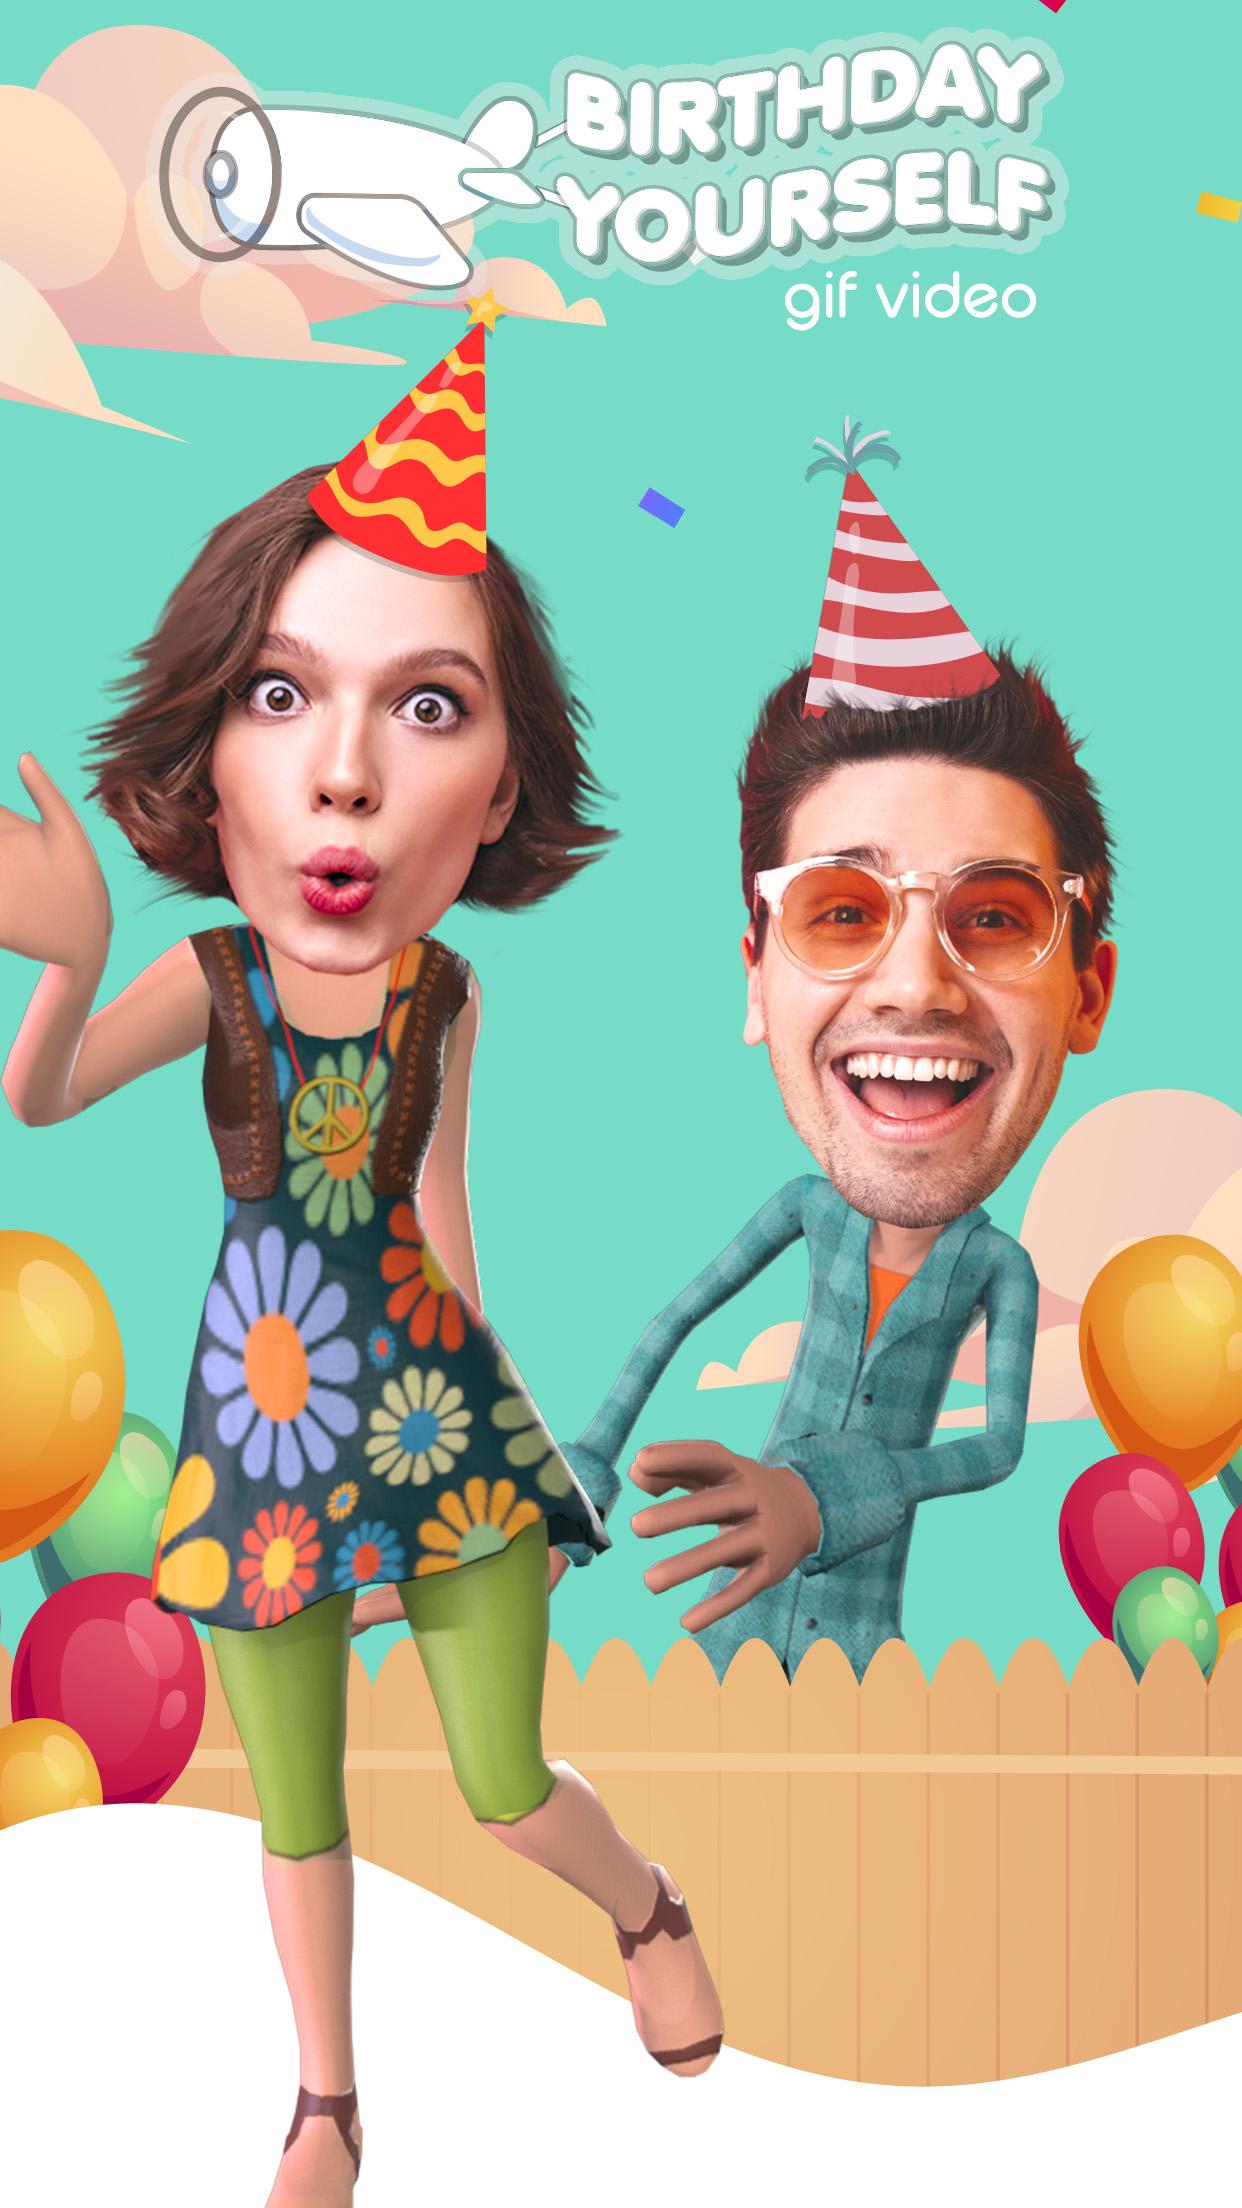 Birthday Yourself - put your face in 3D Gif vide 4 Screenshot 1